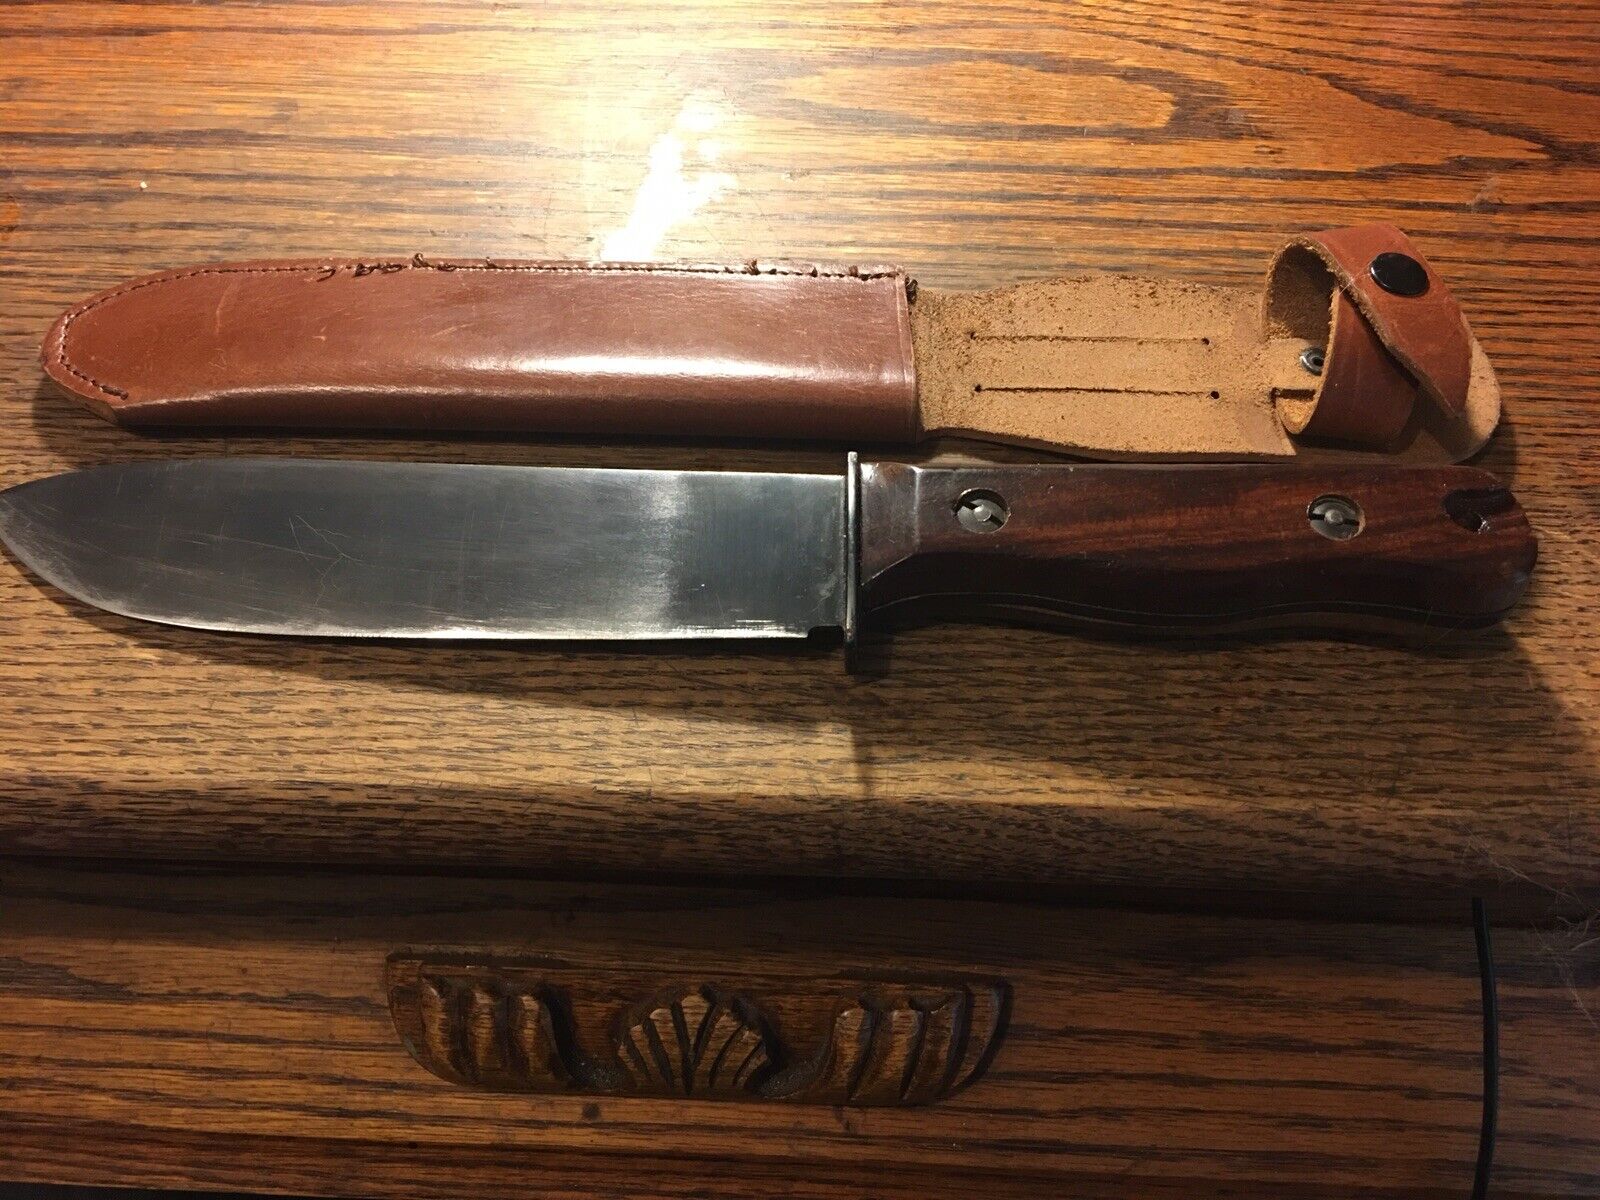 British WWII RAF and Modified Survival Knife with Leather Sheath